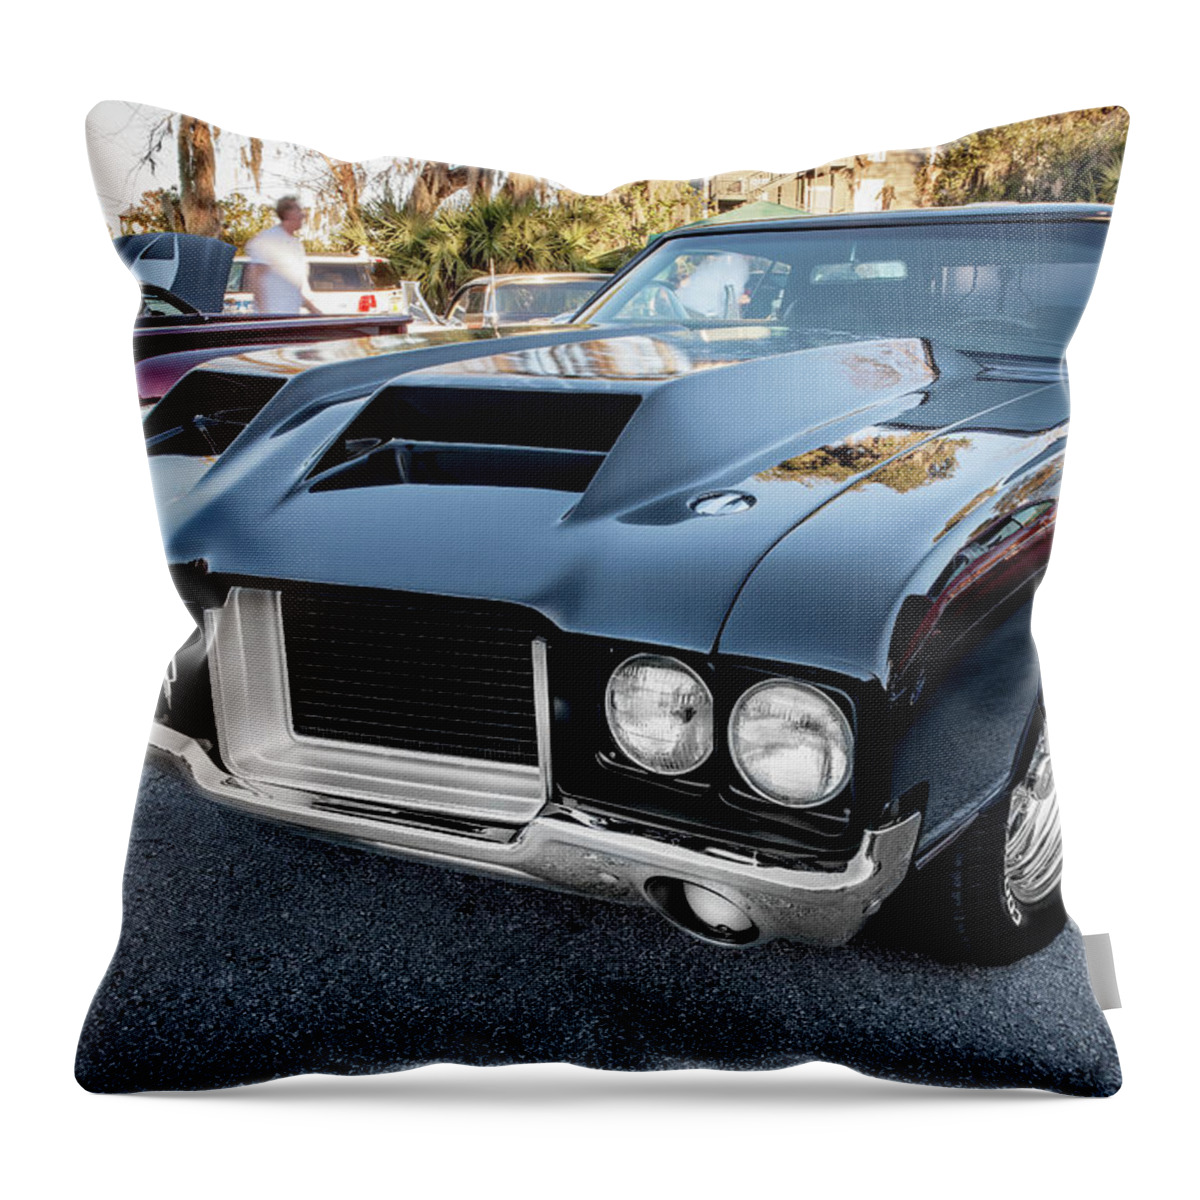 1972 Oldsmobile 442 Throw Pillow featuring the photograph 1972 Oldsmobile 442 X125 by Rich Franco